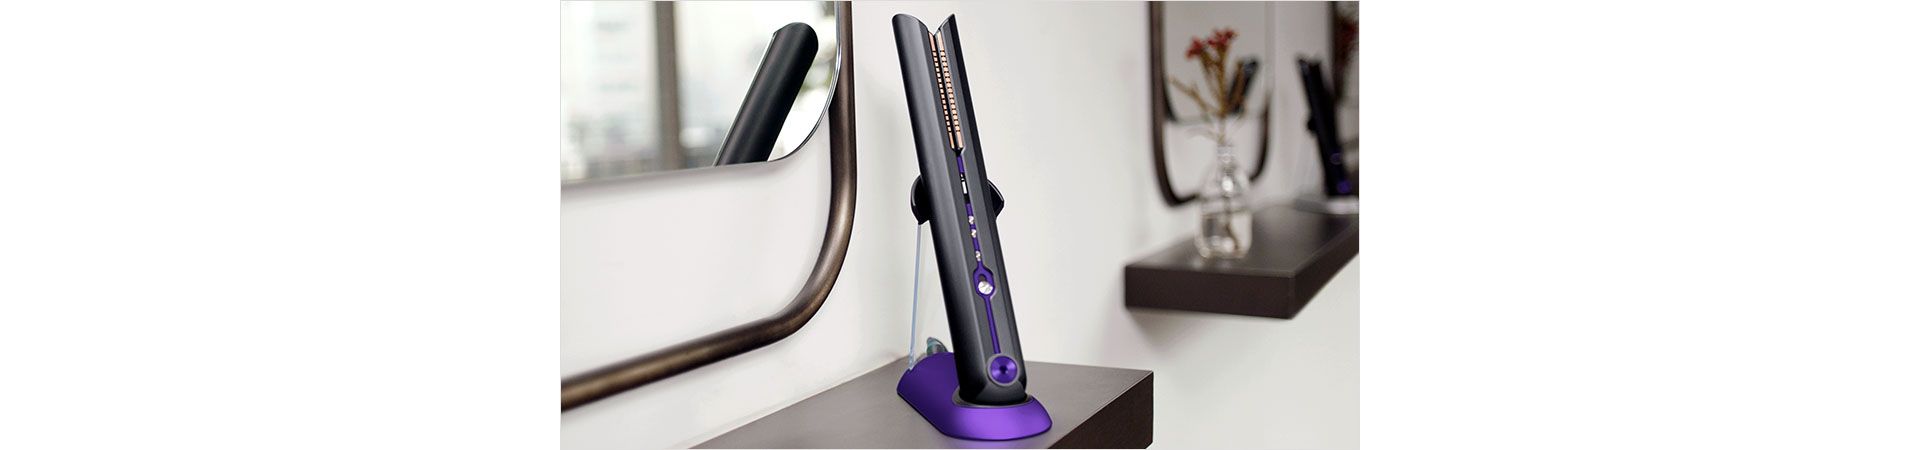 5. Tiffany Blue Hair Straightener for All Hair Types - wide 3